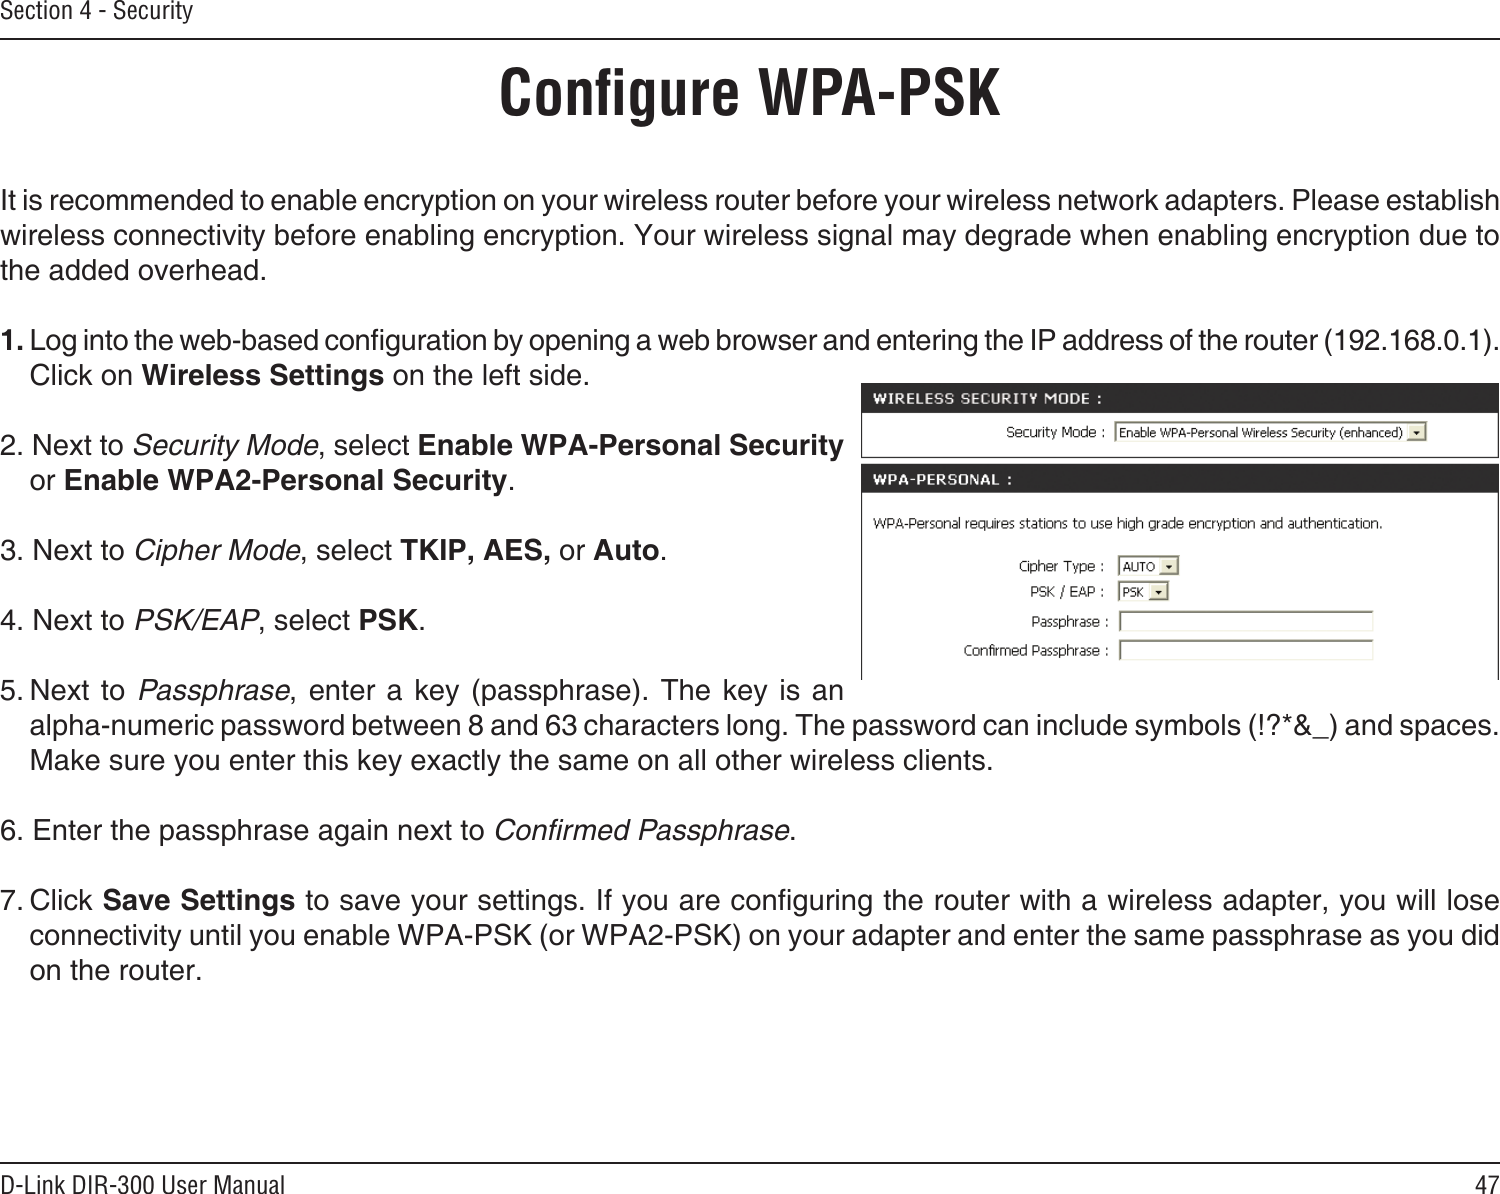 47D-Link DIR-300 User ManualSection 4 - SecurityConﬁgure WPA-PSKIt is recommended to enable encryption on your wireless router before your wireless network adapters. Please establish wireless connectivity before enabling encryption. Your wireless signal may degrade when enabling encryption due to the added overhead.1. Log into the web-based conguration by opening a web browser and entering the IP address of the router (192.168.0.1).  Click on Wireless Settings on the left side.2. Next to Security Mode, select Enable WPA-Personal Security or Enable WPA2-Personal Security.3. Next to Cipher Mode, select TKIP, AES, or Auto.4. Next to PSK/EAP, select PSK.5. Next to Passphrase,  enter a key  (passphrase).  The key is  an  alpha-numeric password between 8 and 63 characters long. The password can include symbols (!?*&amp;_) and spaces. Make sure you enter this key exactly the same on all other wireless clients.6. Enter the passphrase again next to Conﬁrmed Passphrase.7. Click Save Settings to save your settings. If you are conguring the router with a wireless adapter, you will lose connectivity until you enable WPA-PSK (or WPA2-PSK) on your adapter and enter the same passphrase as you did on the router.